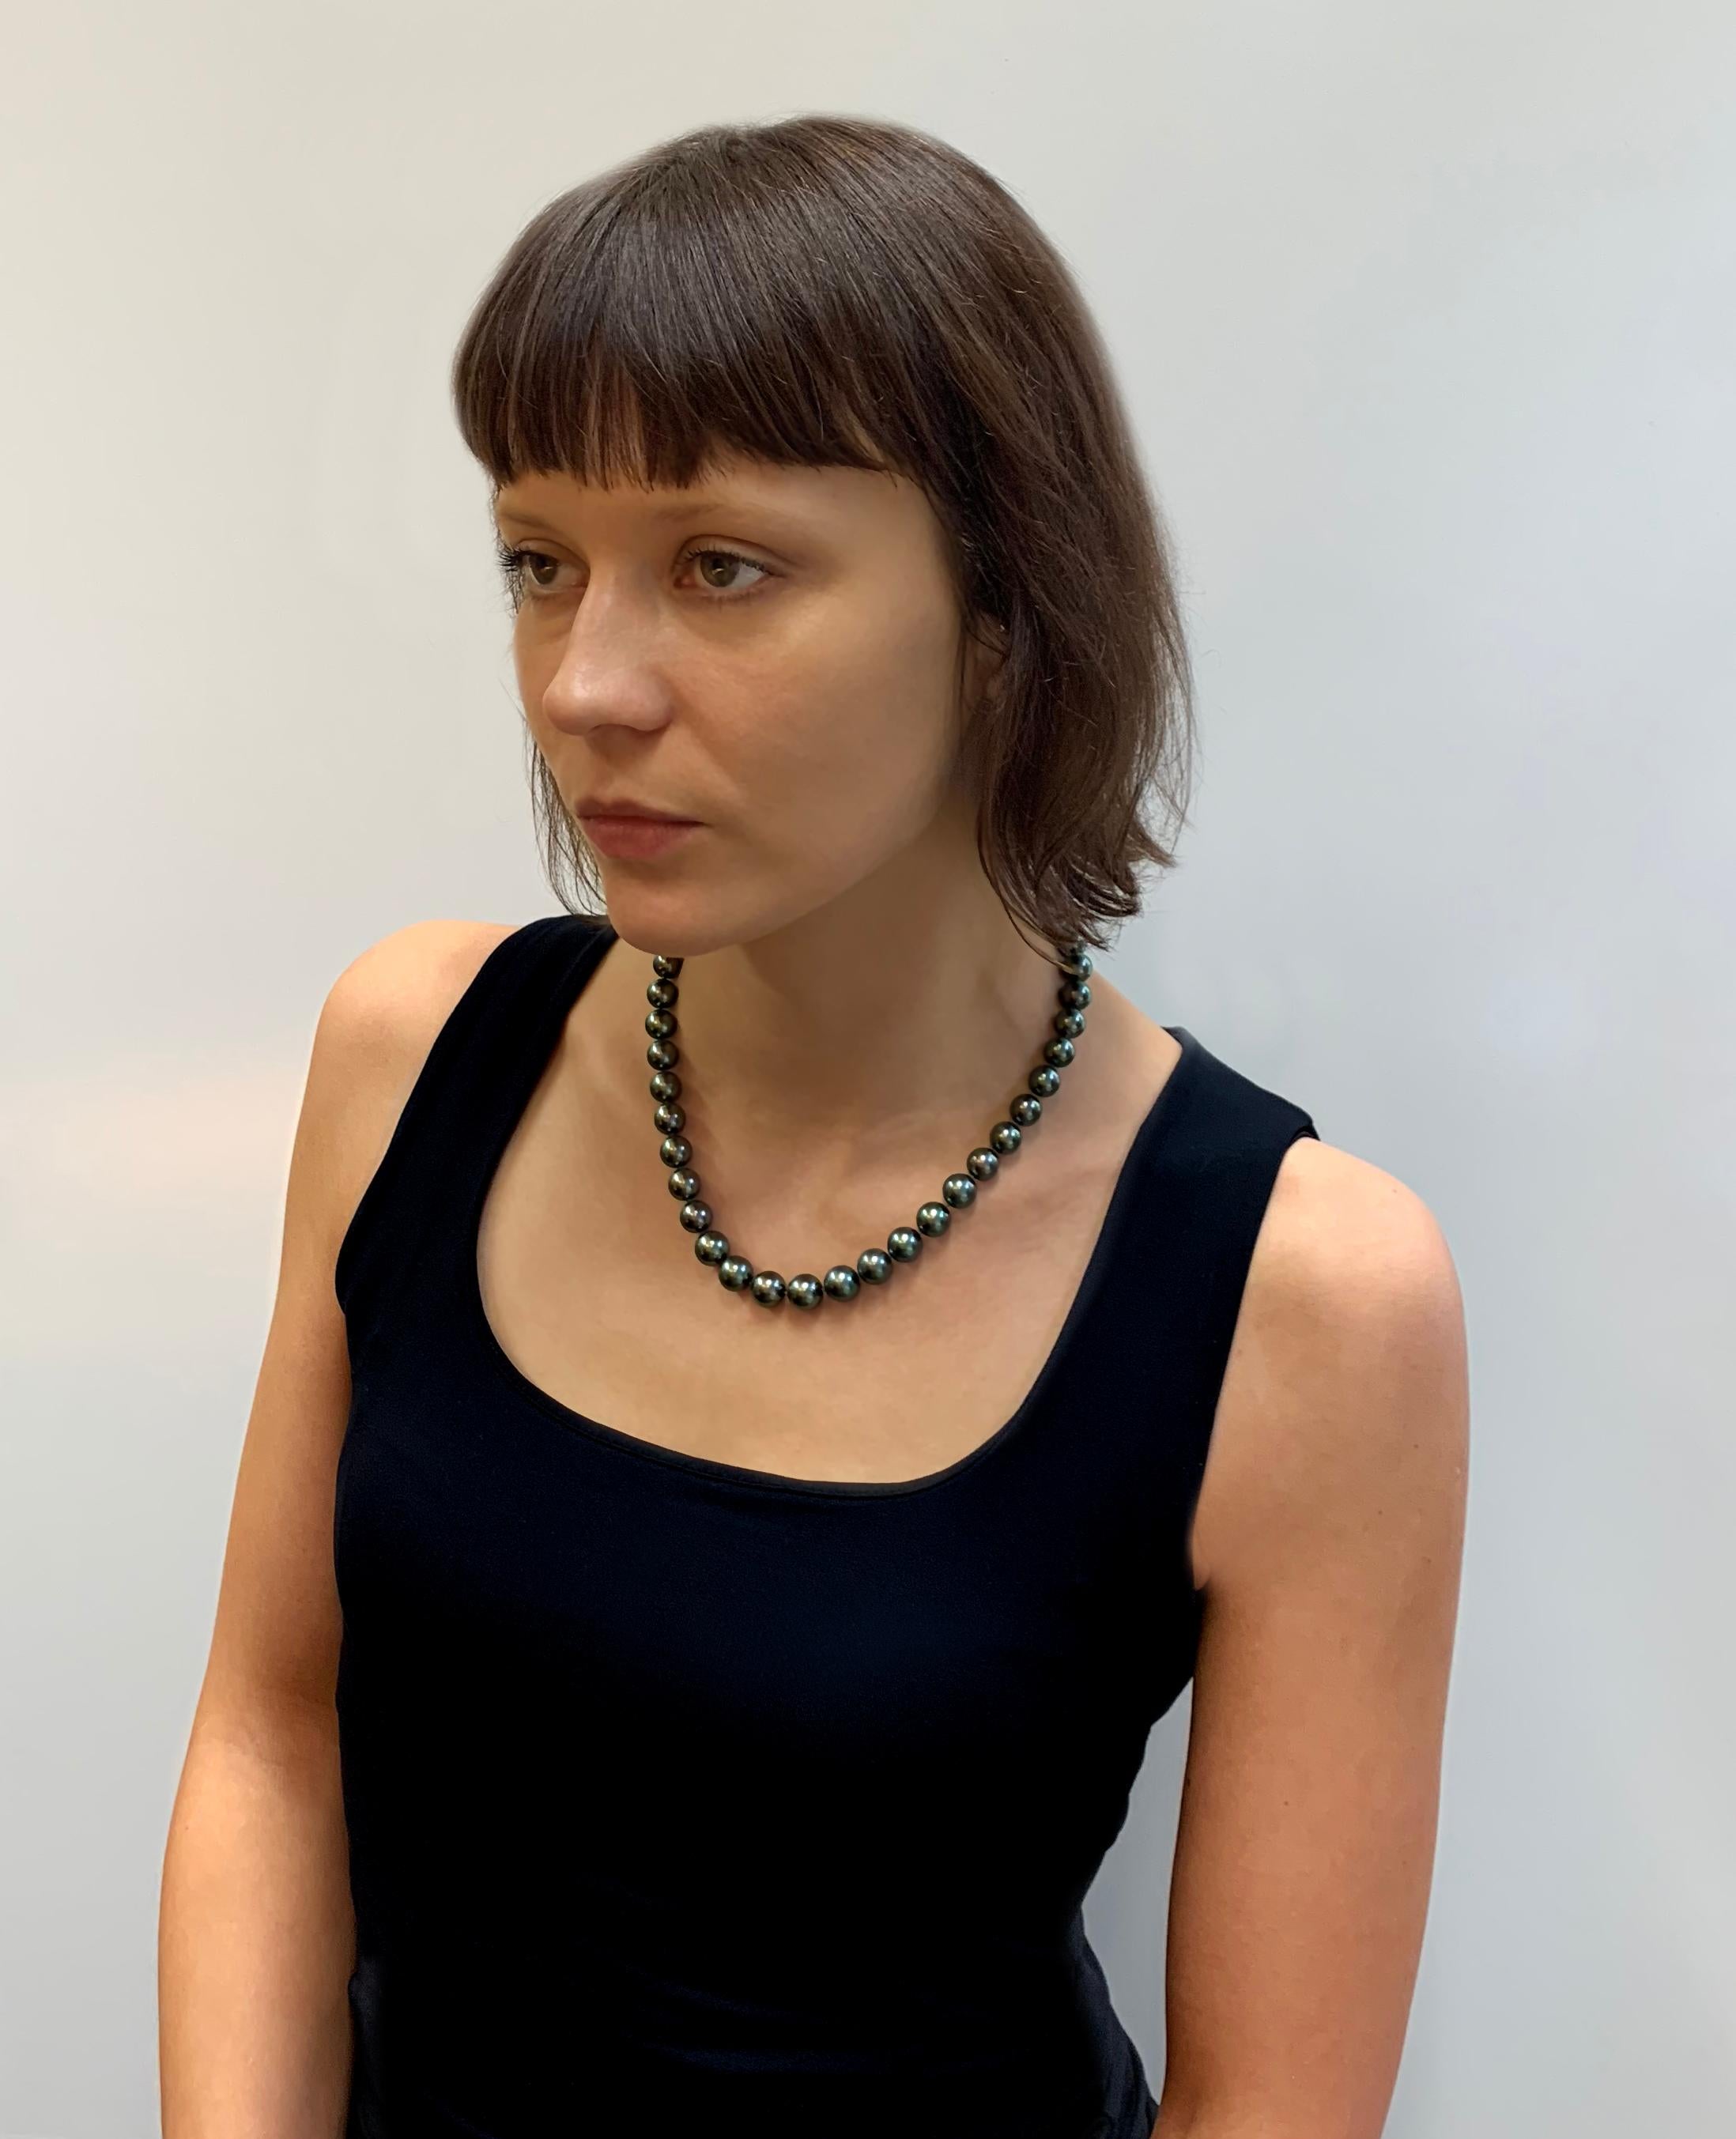 The metallic lustre of these Fine Quality Grey Tahitian Pearls are showcased spectacularly in this classic row necklace by Yoko London. The Pearls in the necklace gently graduate in size, and have each been hand selected by our experts for their